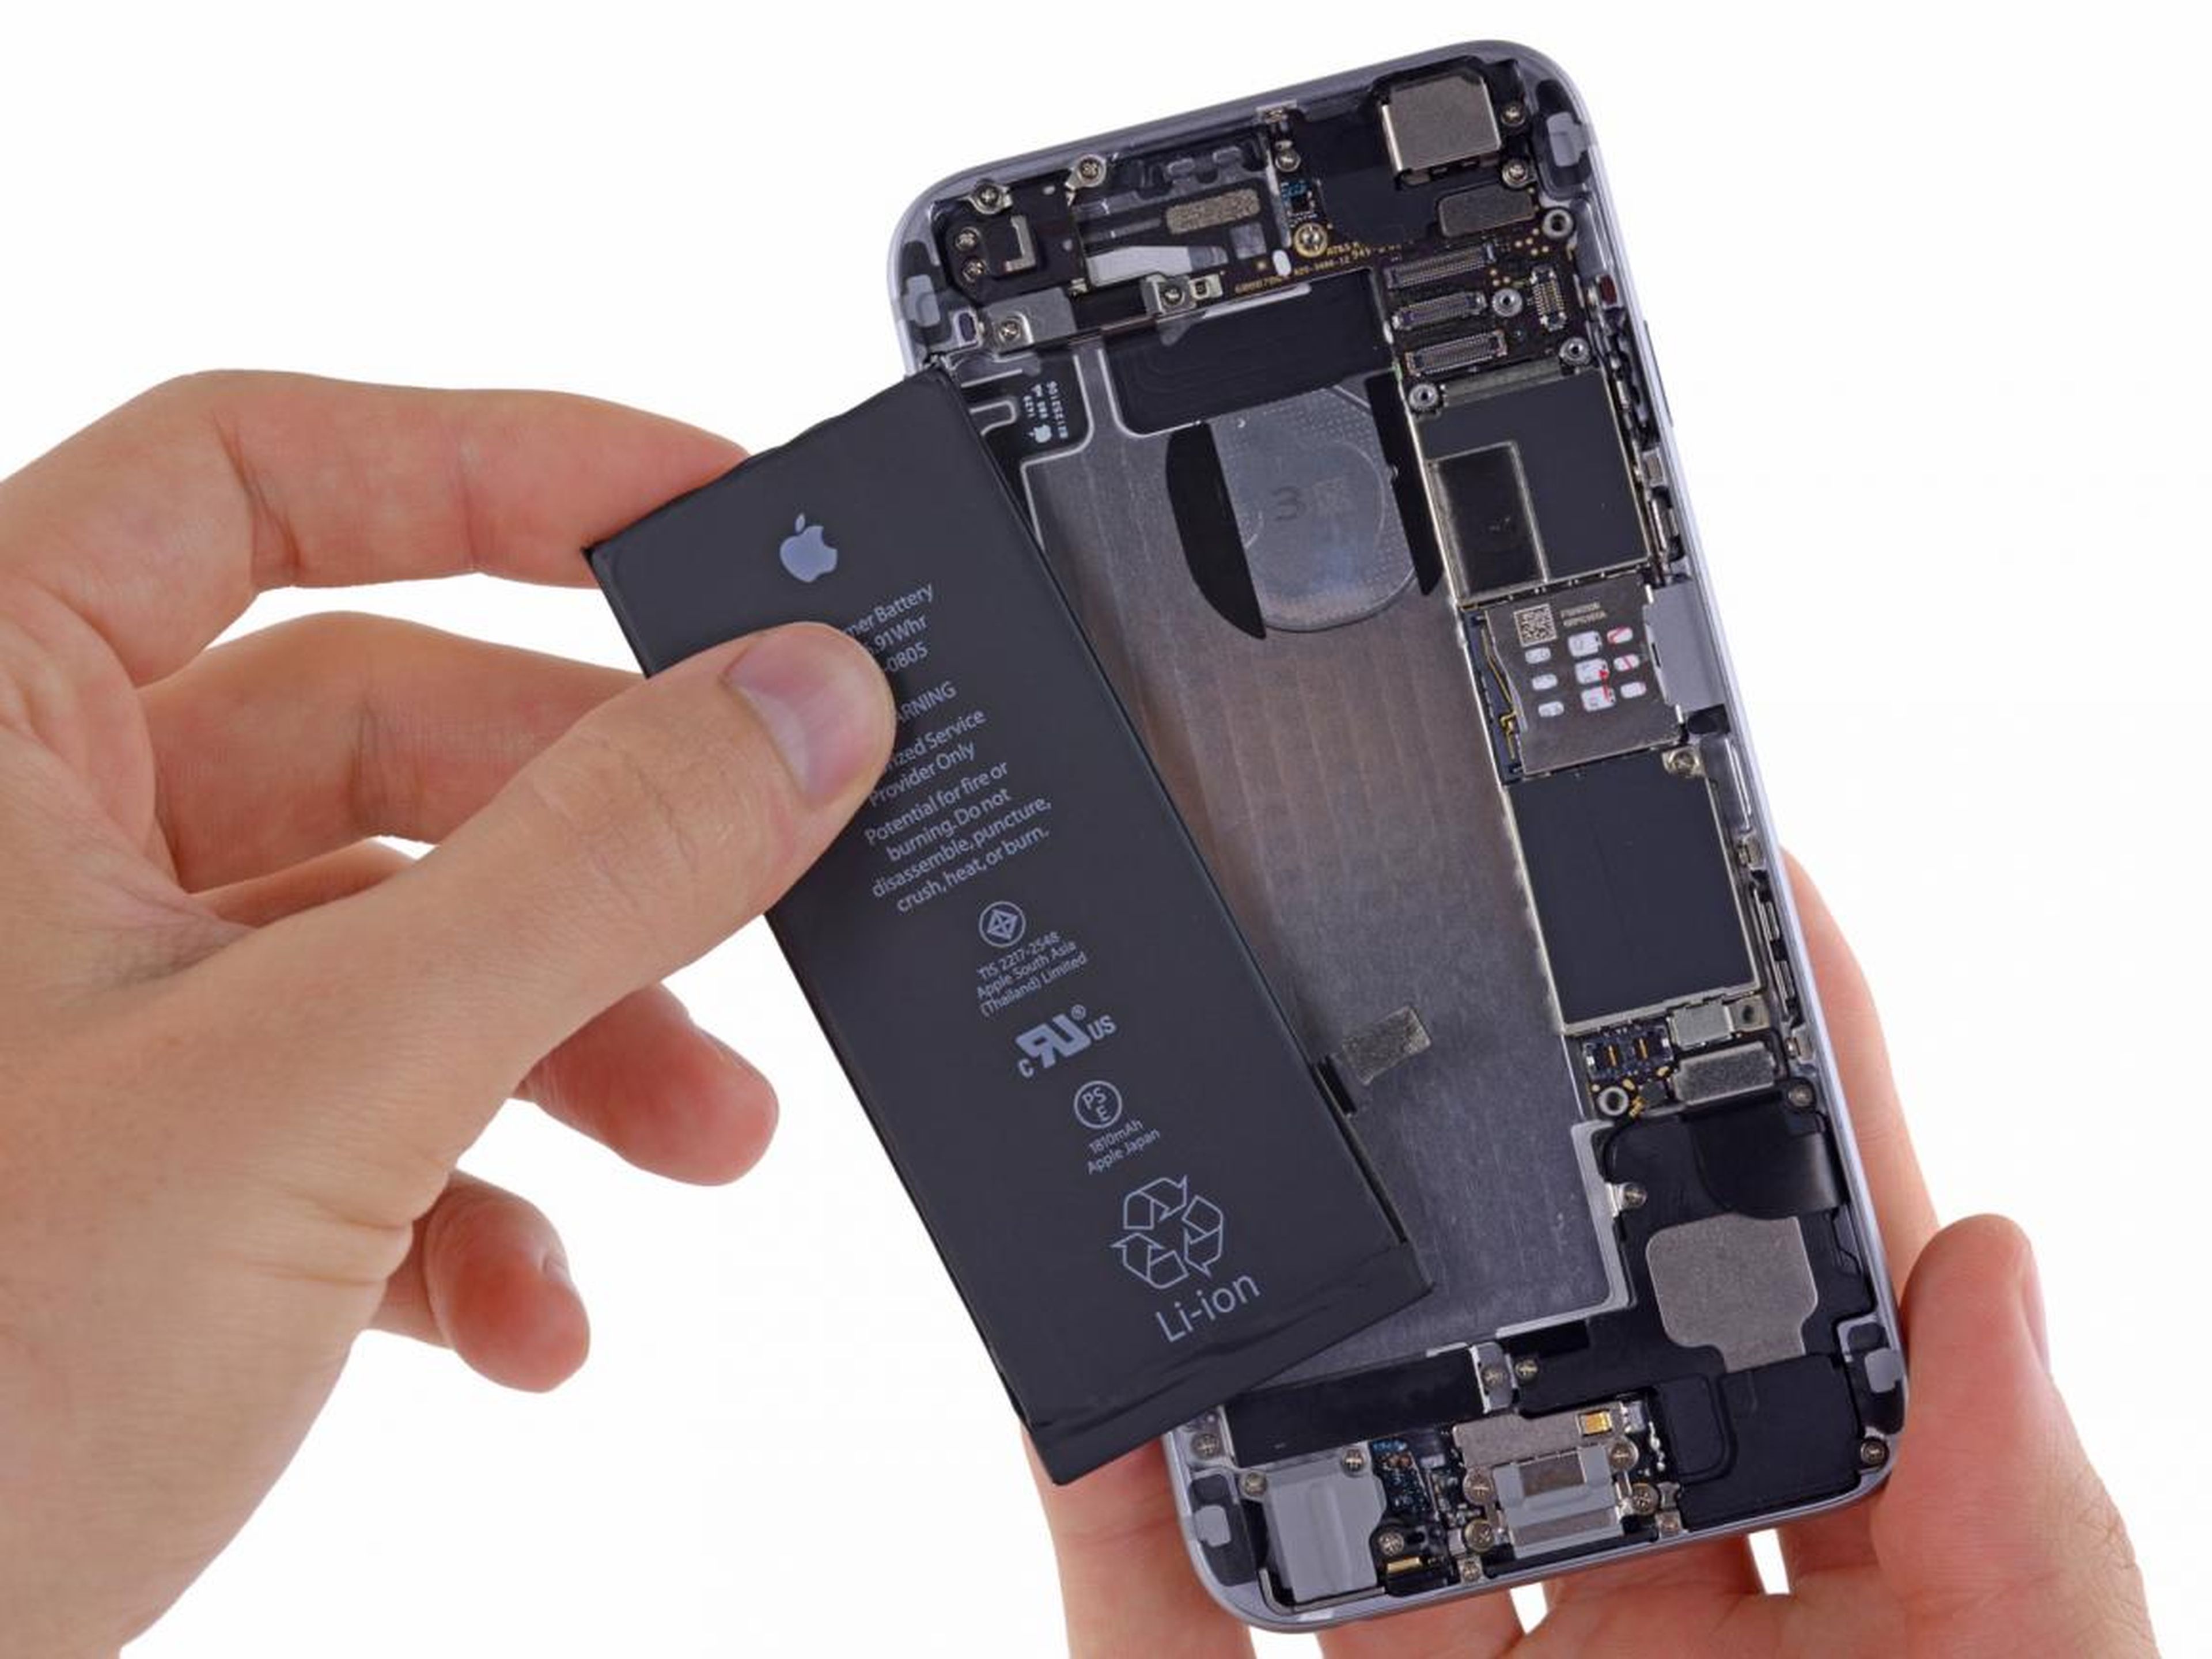 The company expects its iPhone problems to continue in the current quarter.